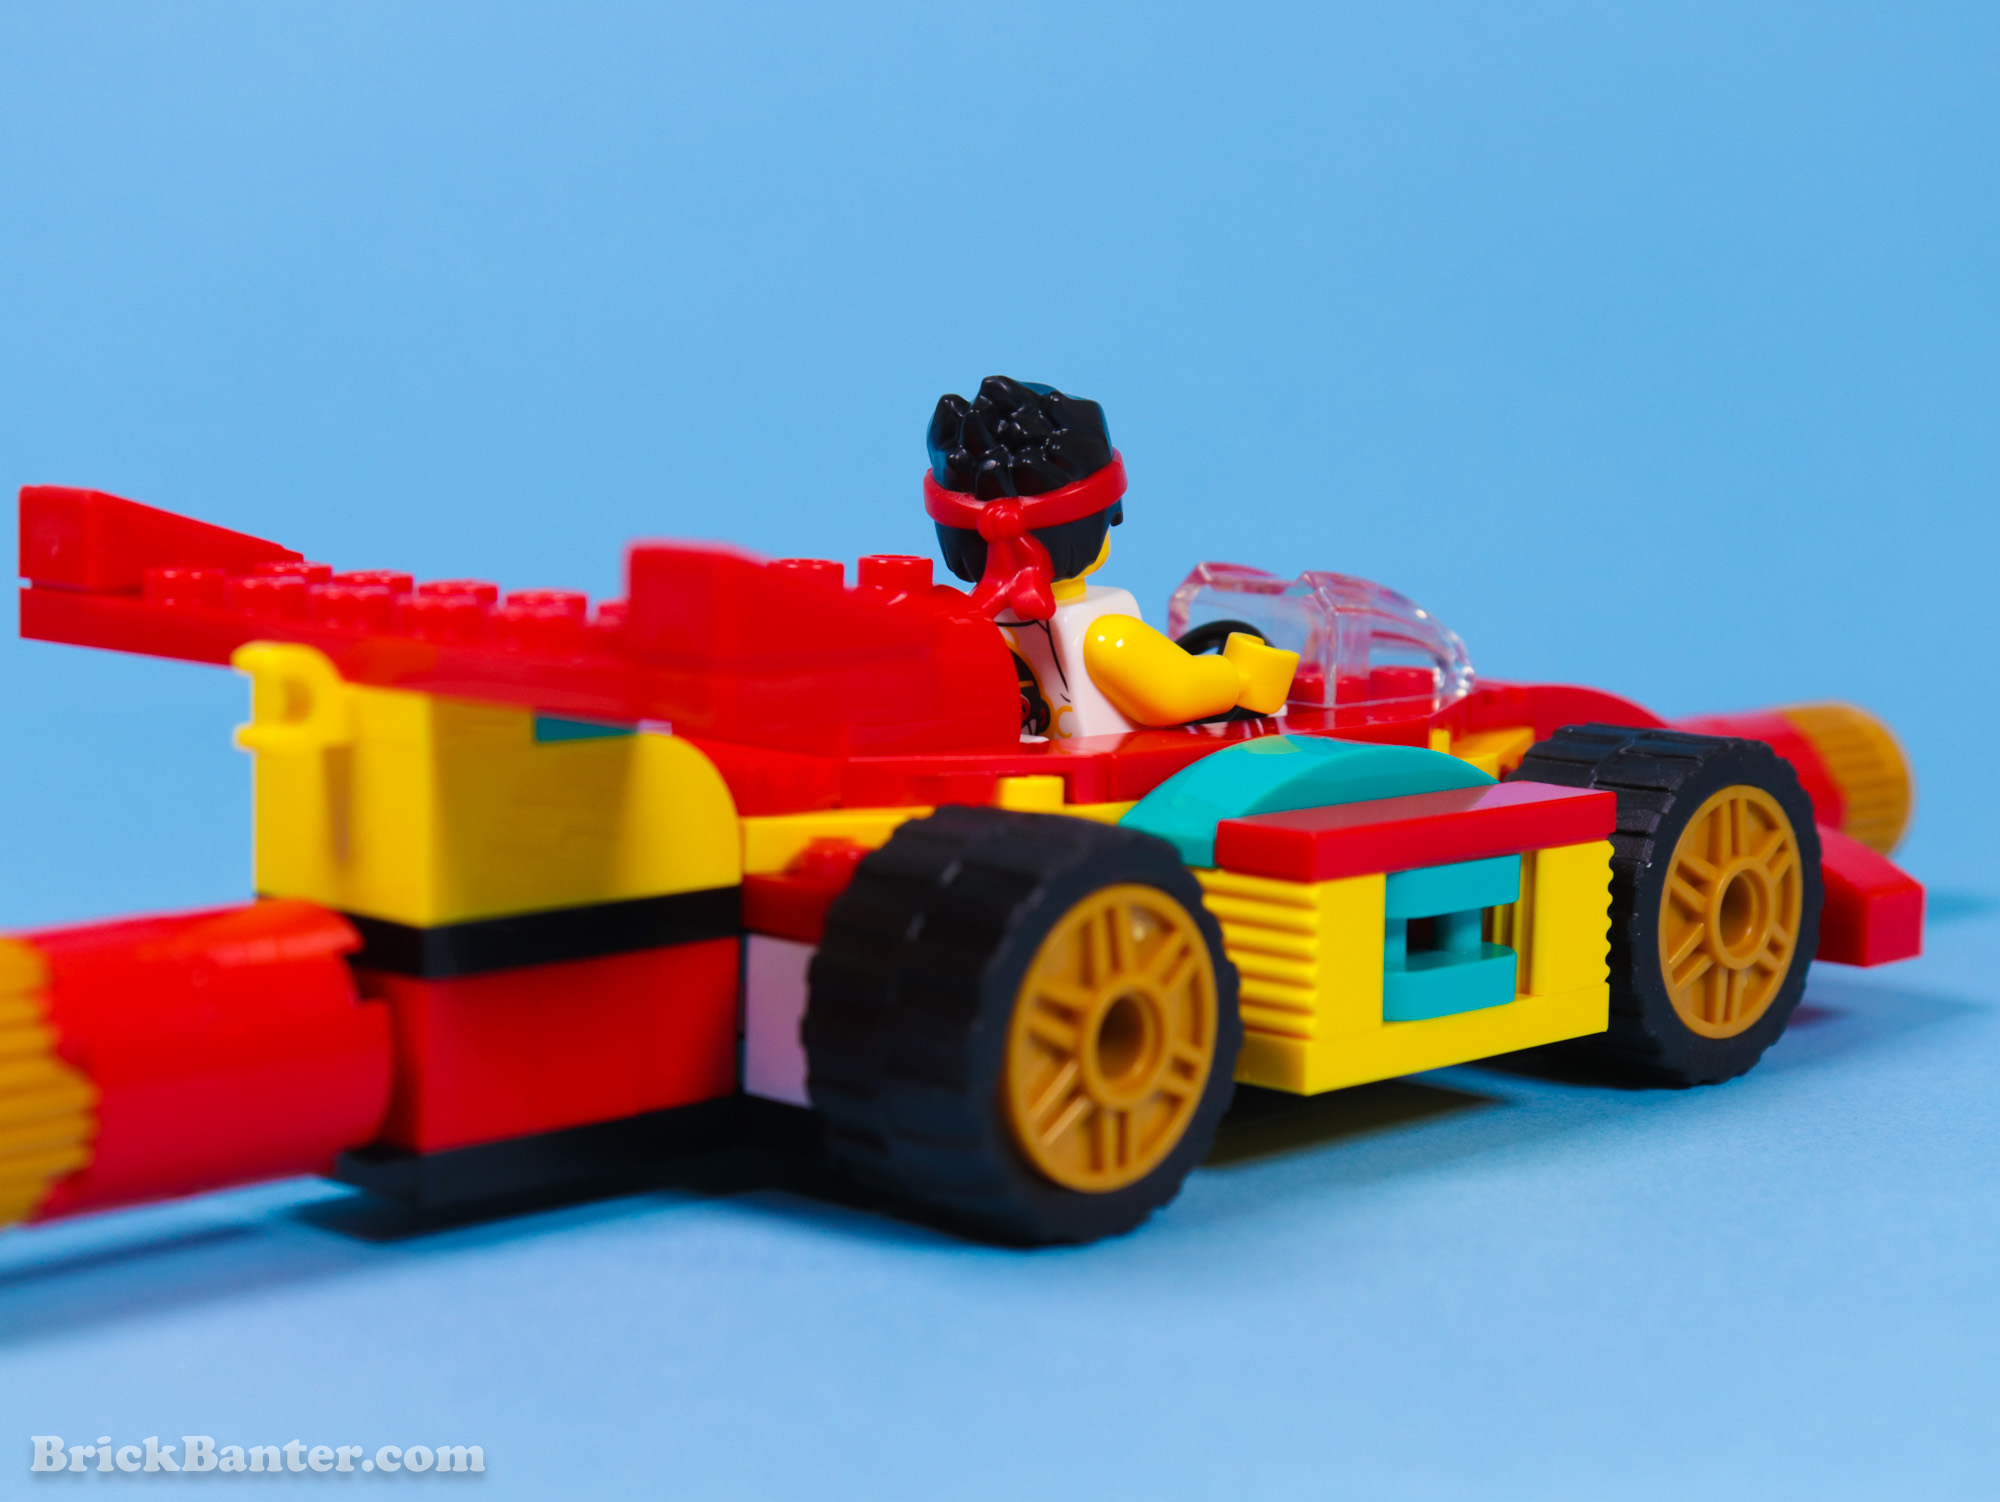 LEGO 80030 Monkie Kid – Monkie Kid’s Staff Creations Set Review